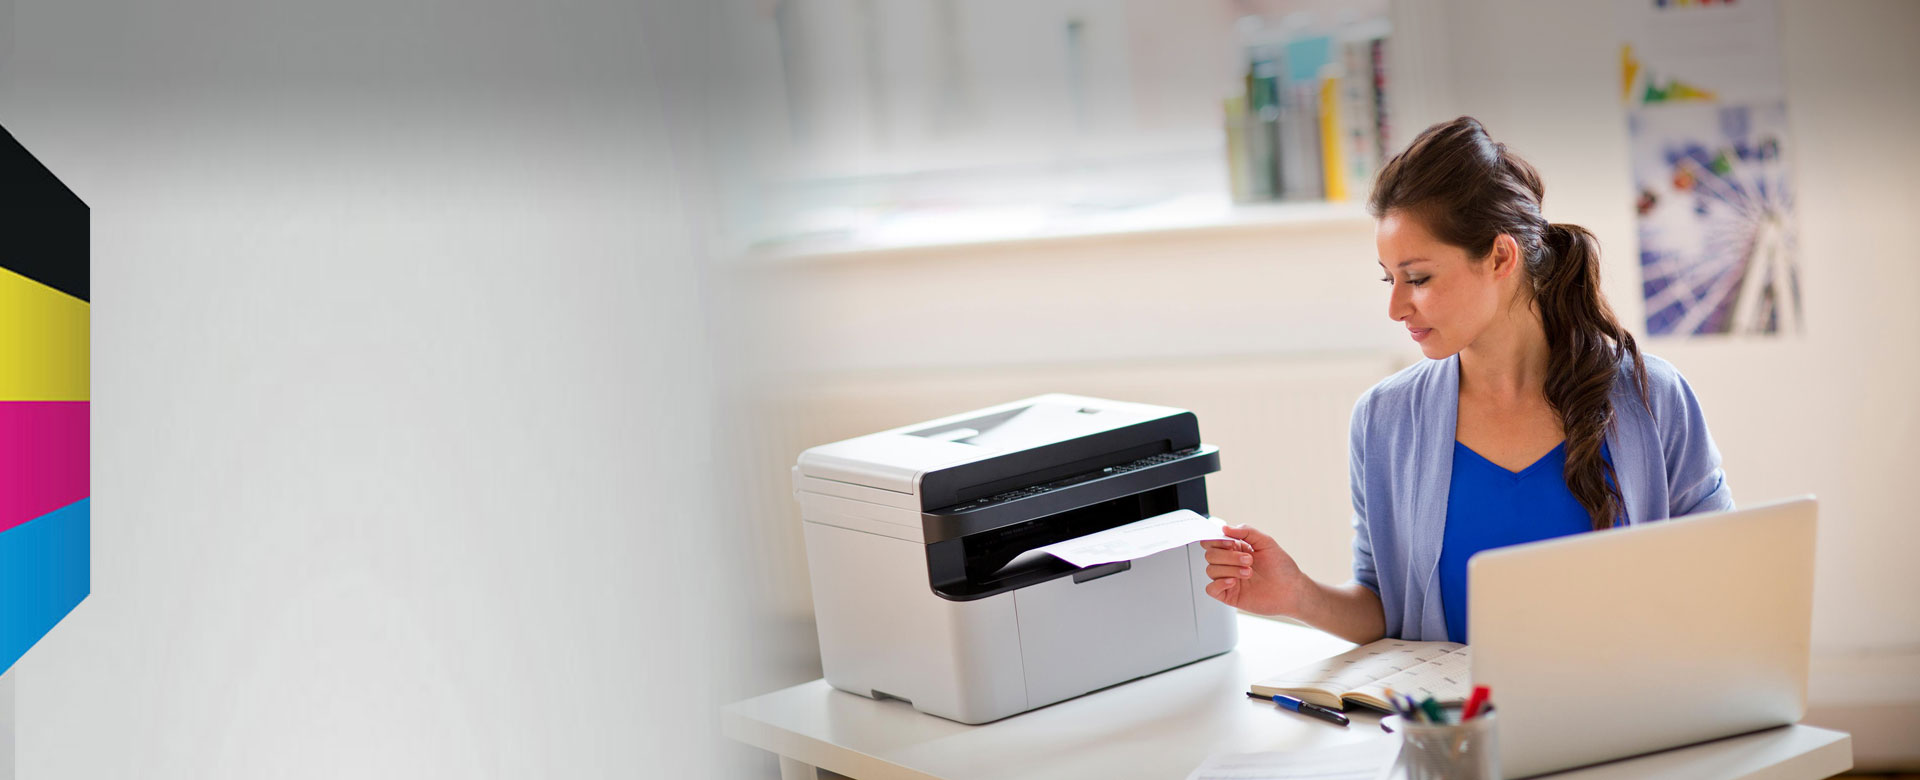 office printers dealers in chennai